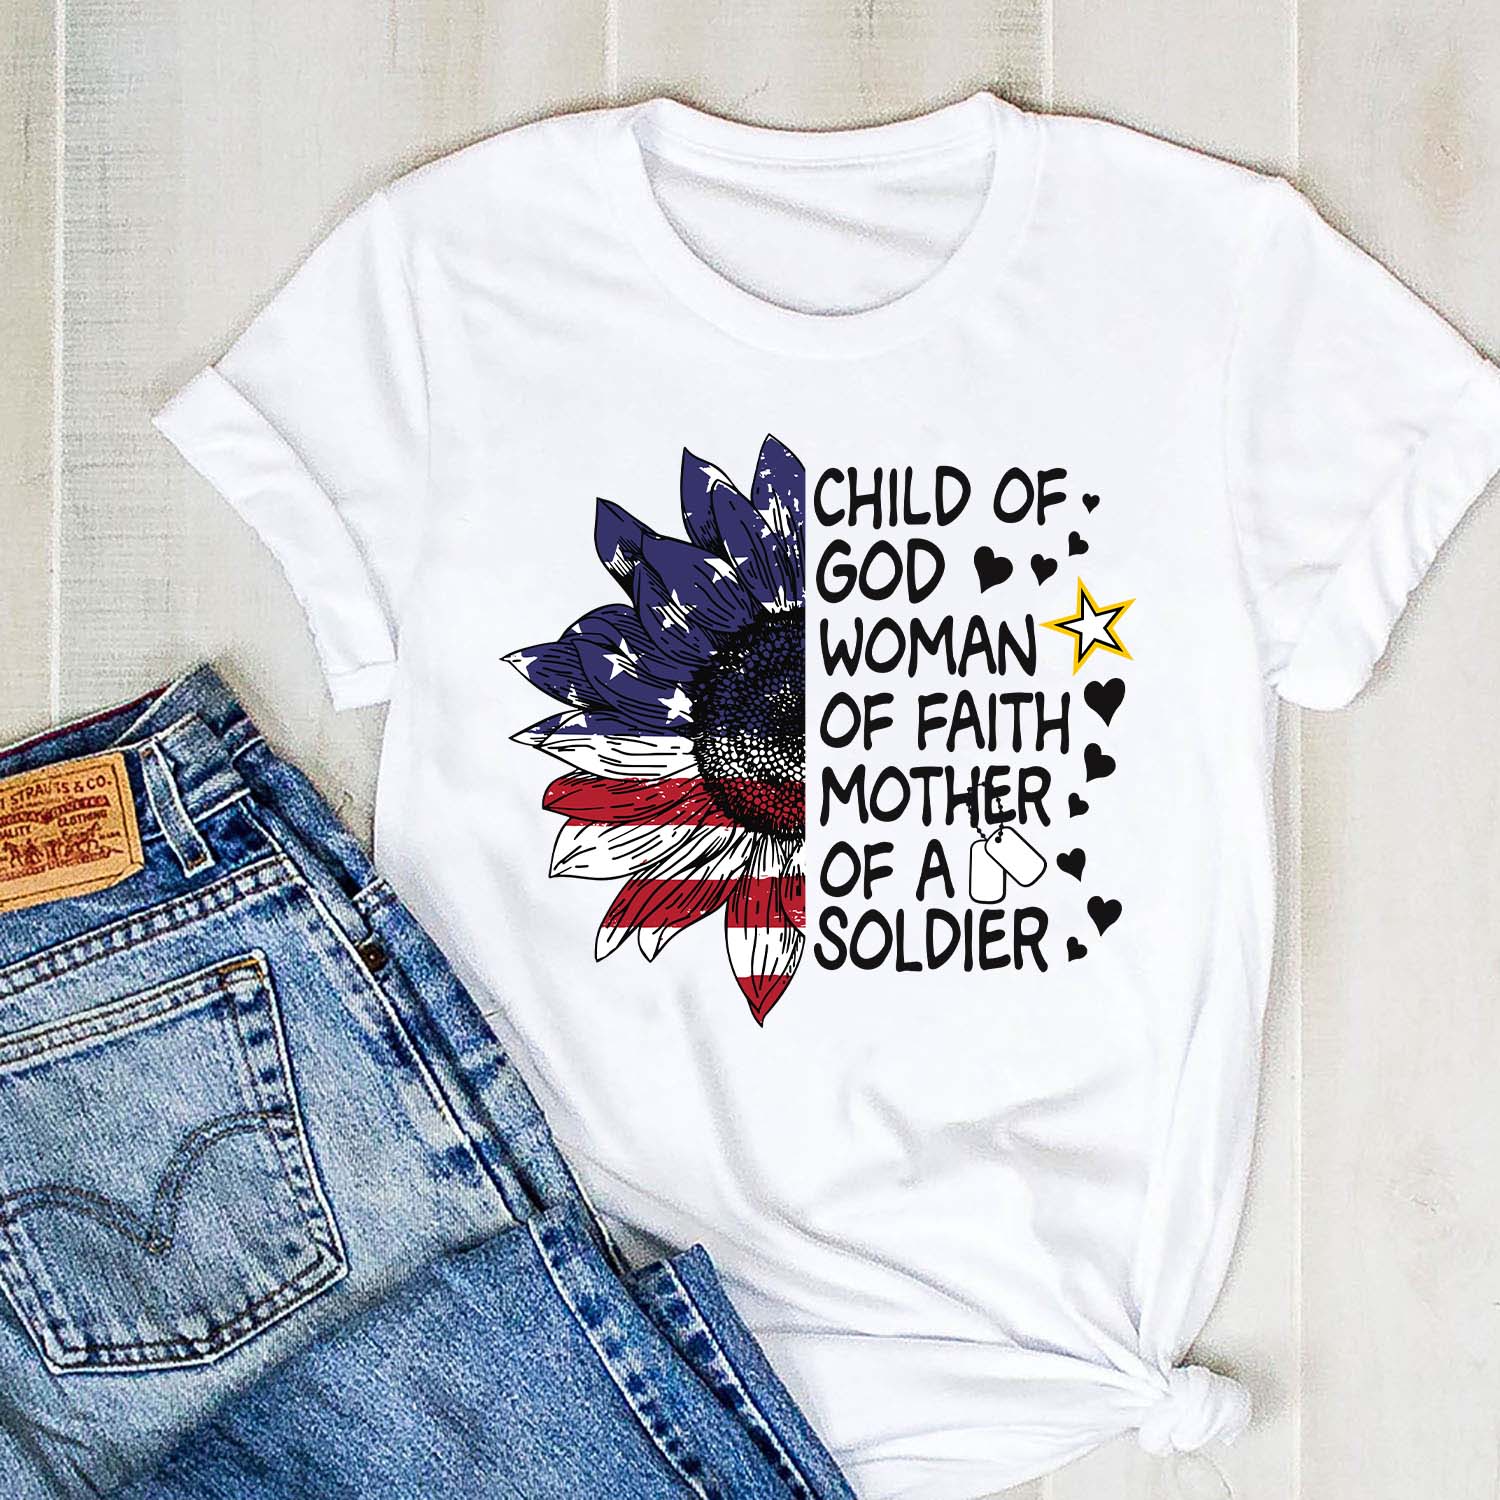 Mother of a Soldier Army Mom V-neck T-shirt Tank Military mom gift shirt